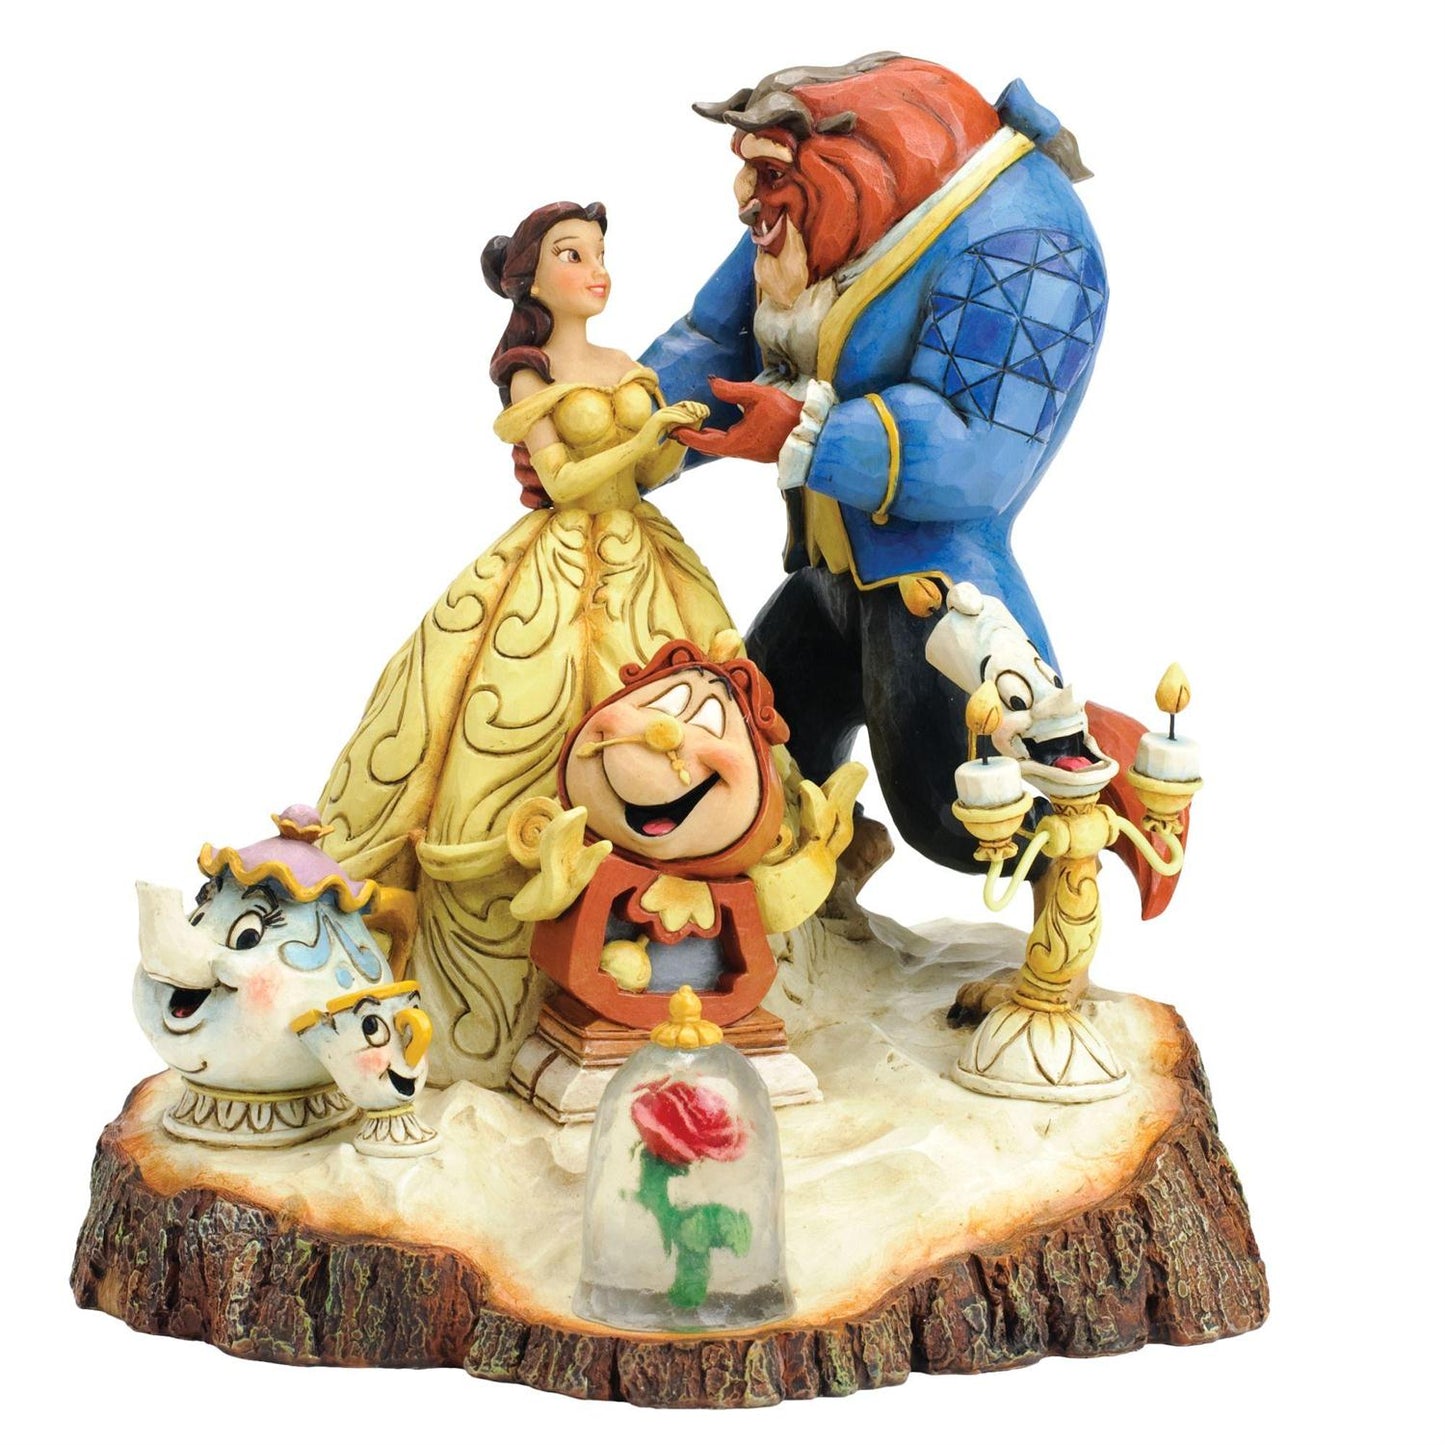 Disney Traditions by Jim Shore “Tale as Old as Time” Beauty & The Beast